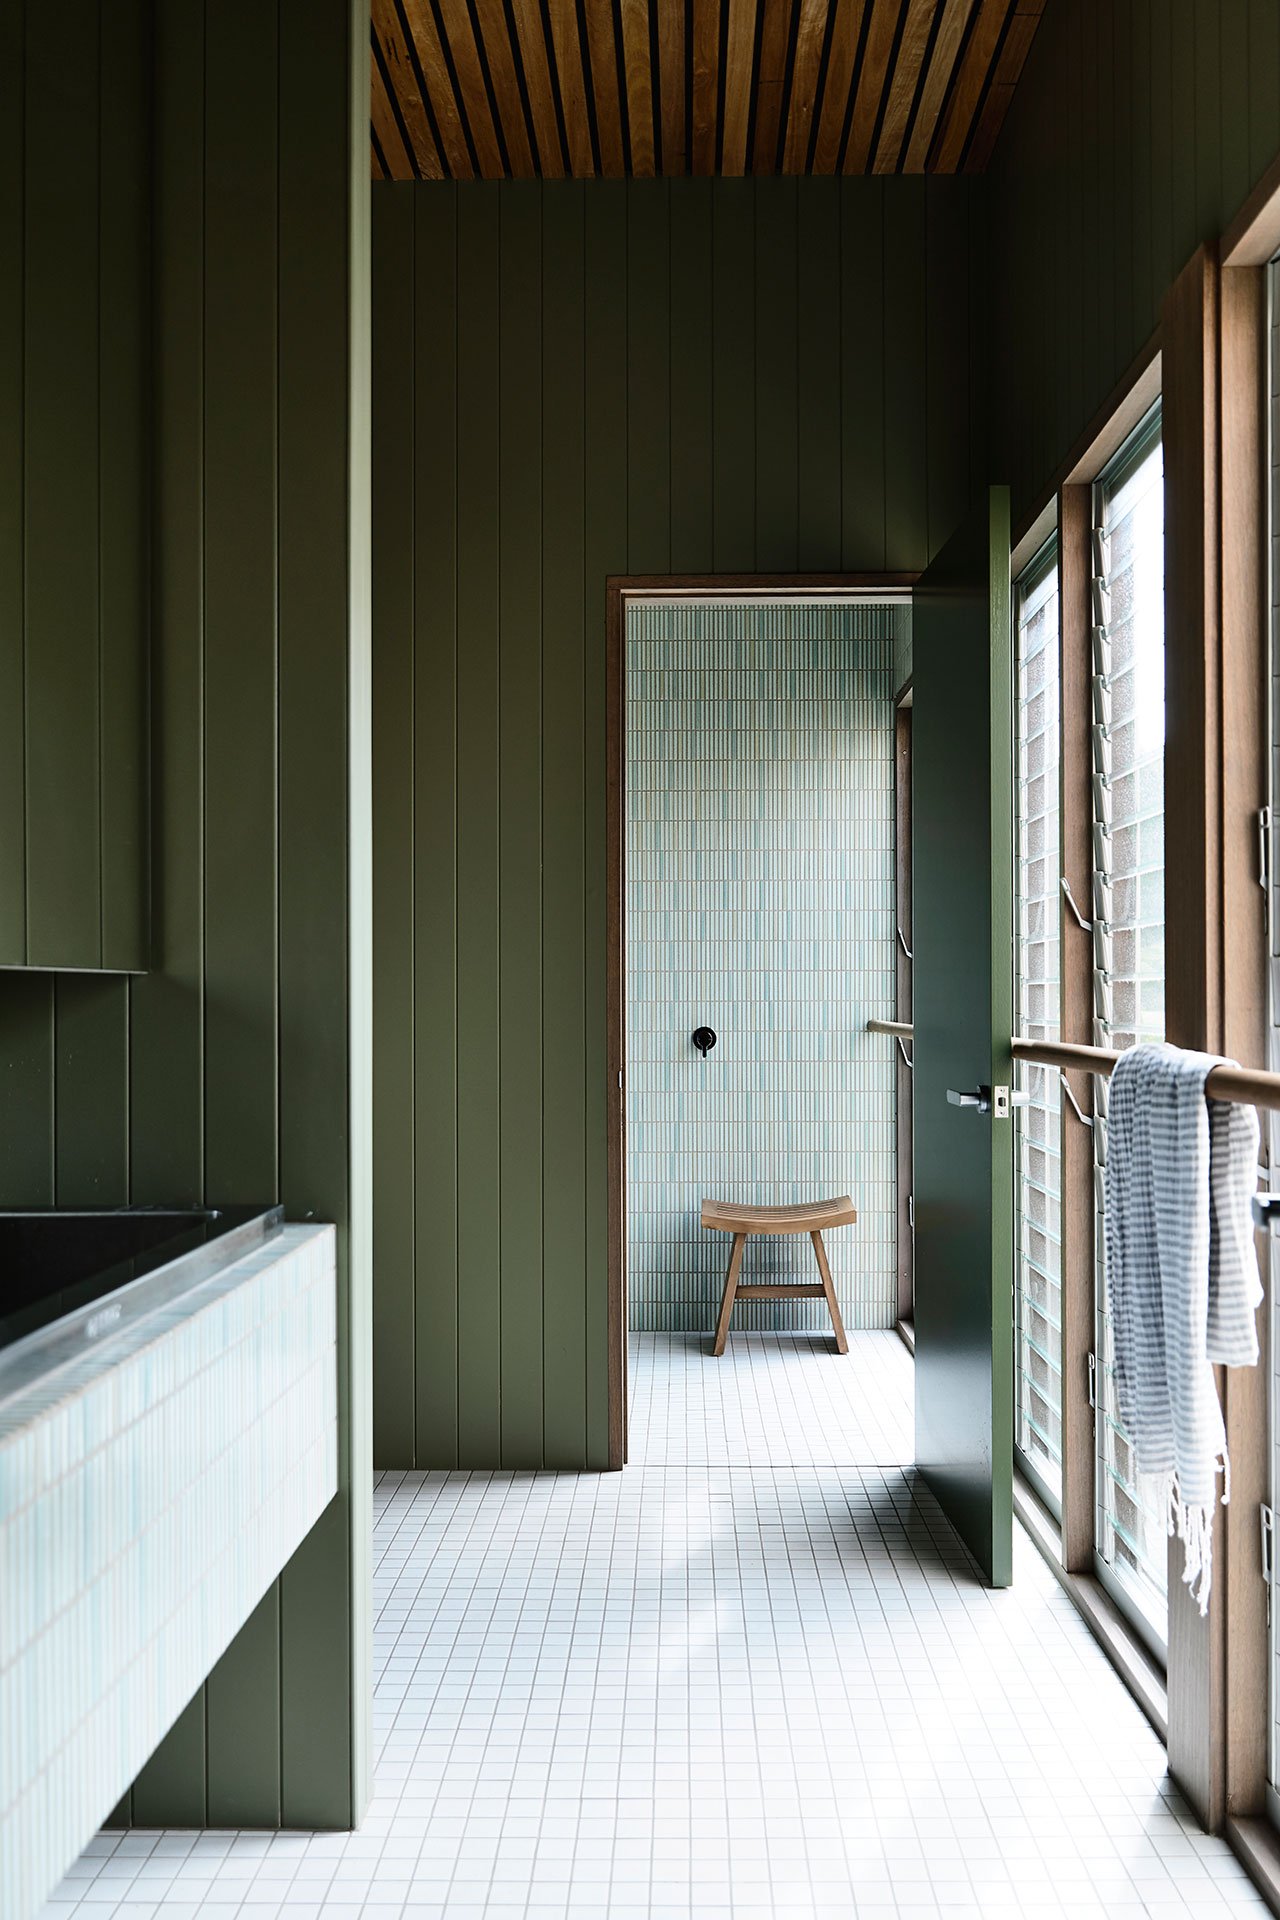 Another bathroom shows off neutral and green tiles that match sage green wood